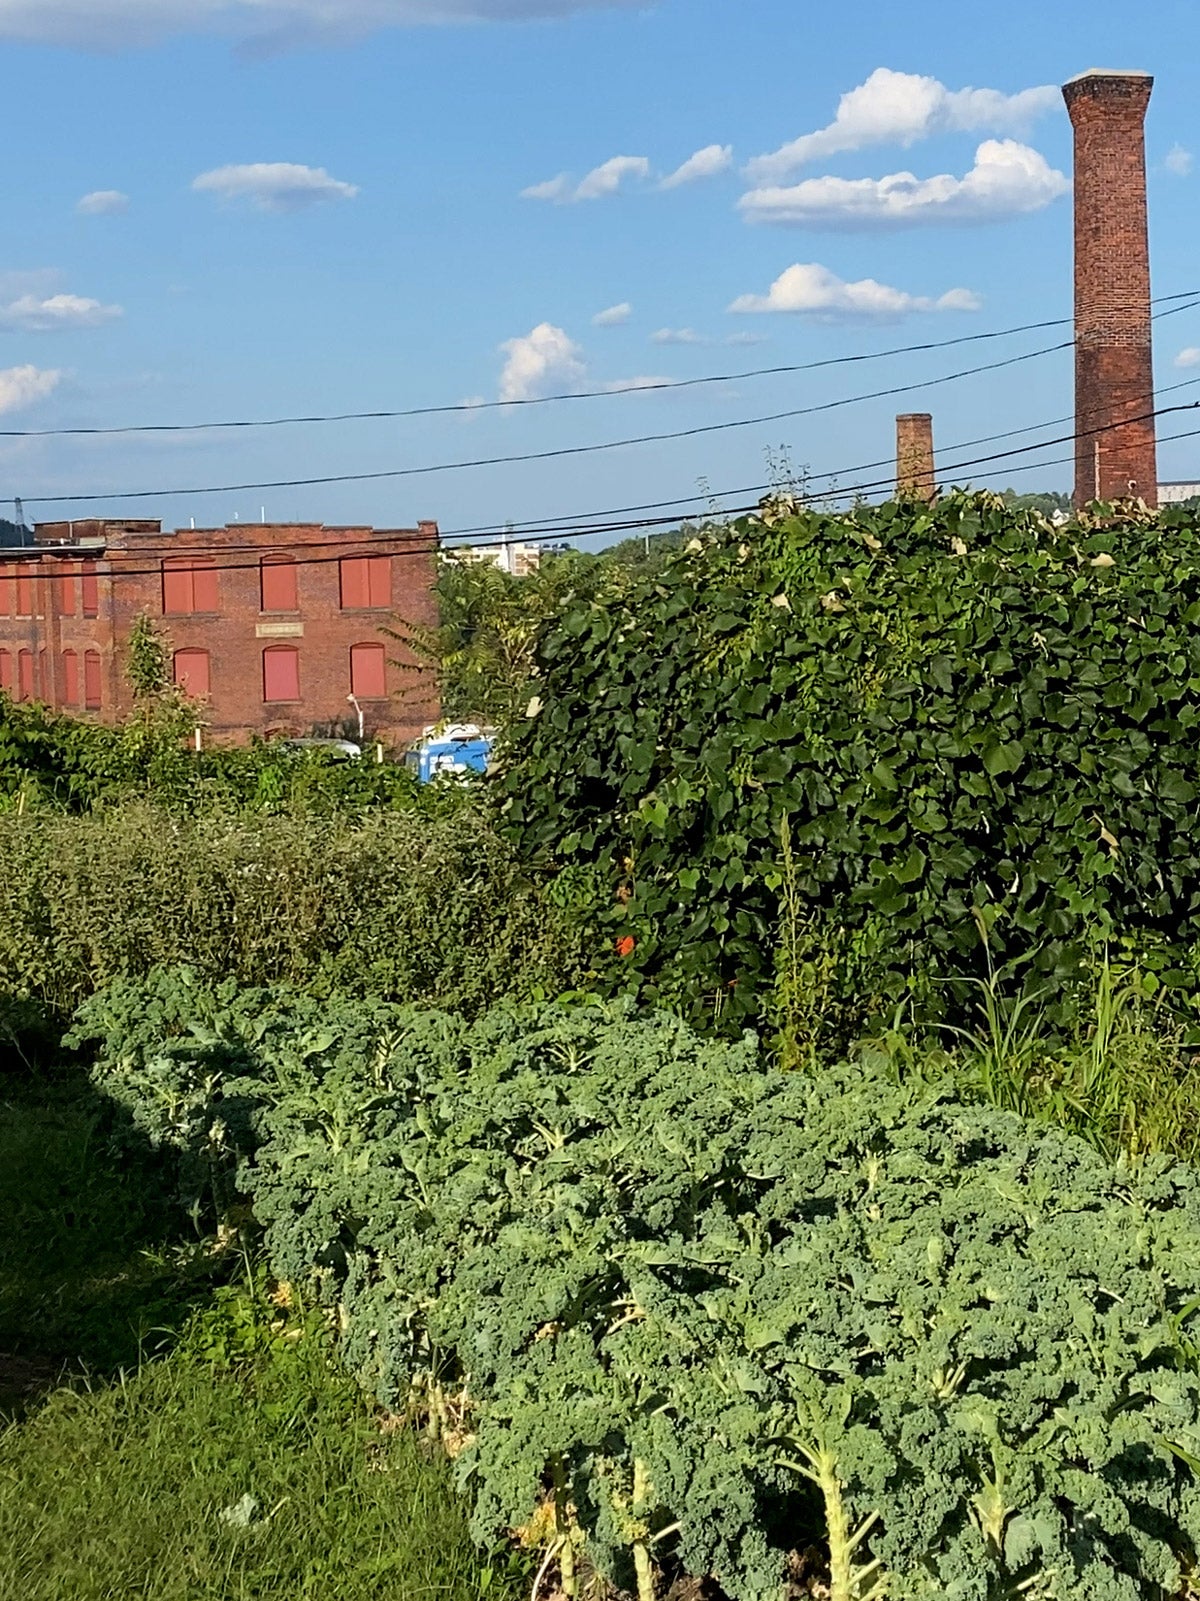 An urban farm in Worcester, Massachusetts. Rows of kale, dandelions, and other plants are in a large green field with old factory smokestacks and factory buildings in the background.